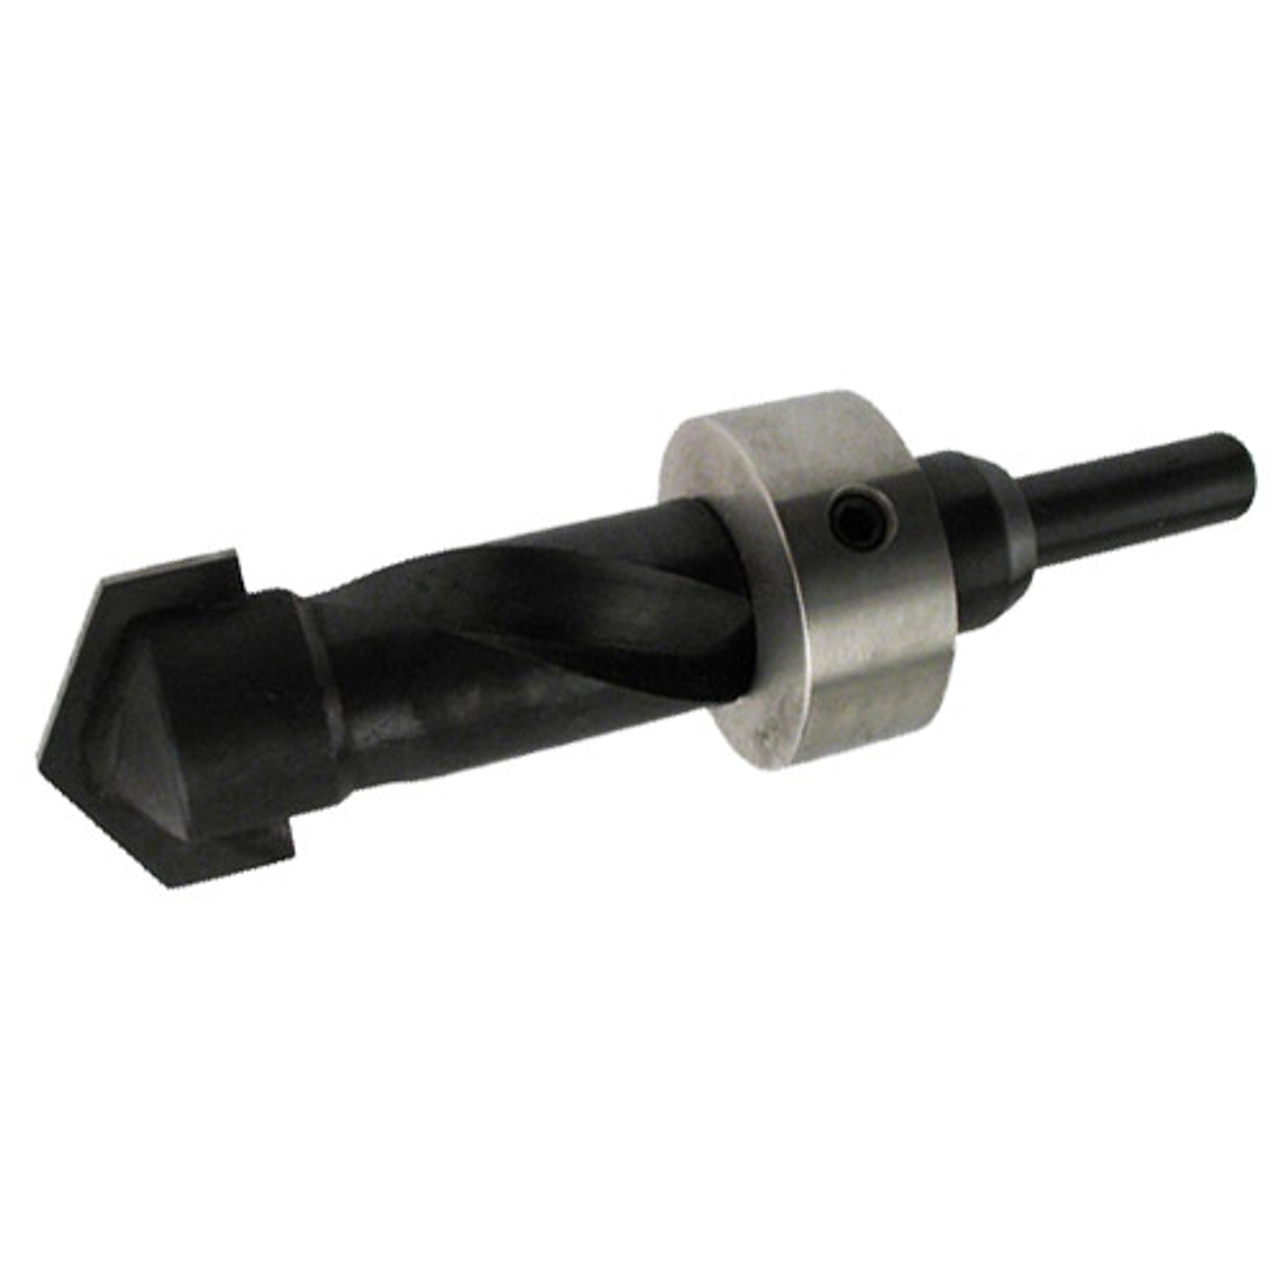 Turbo Switch Grip Drill Bit With Stopper